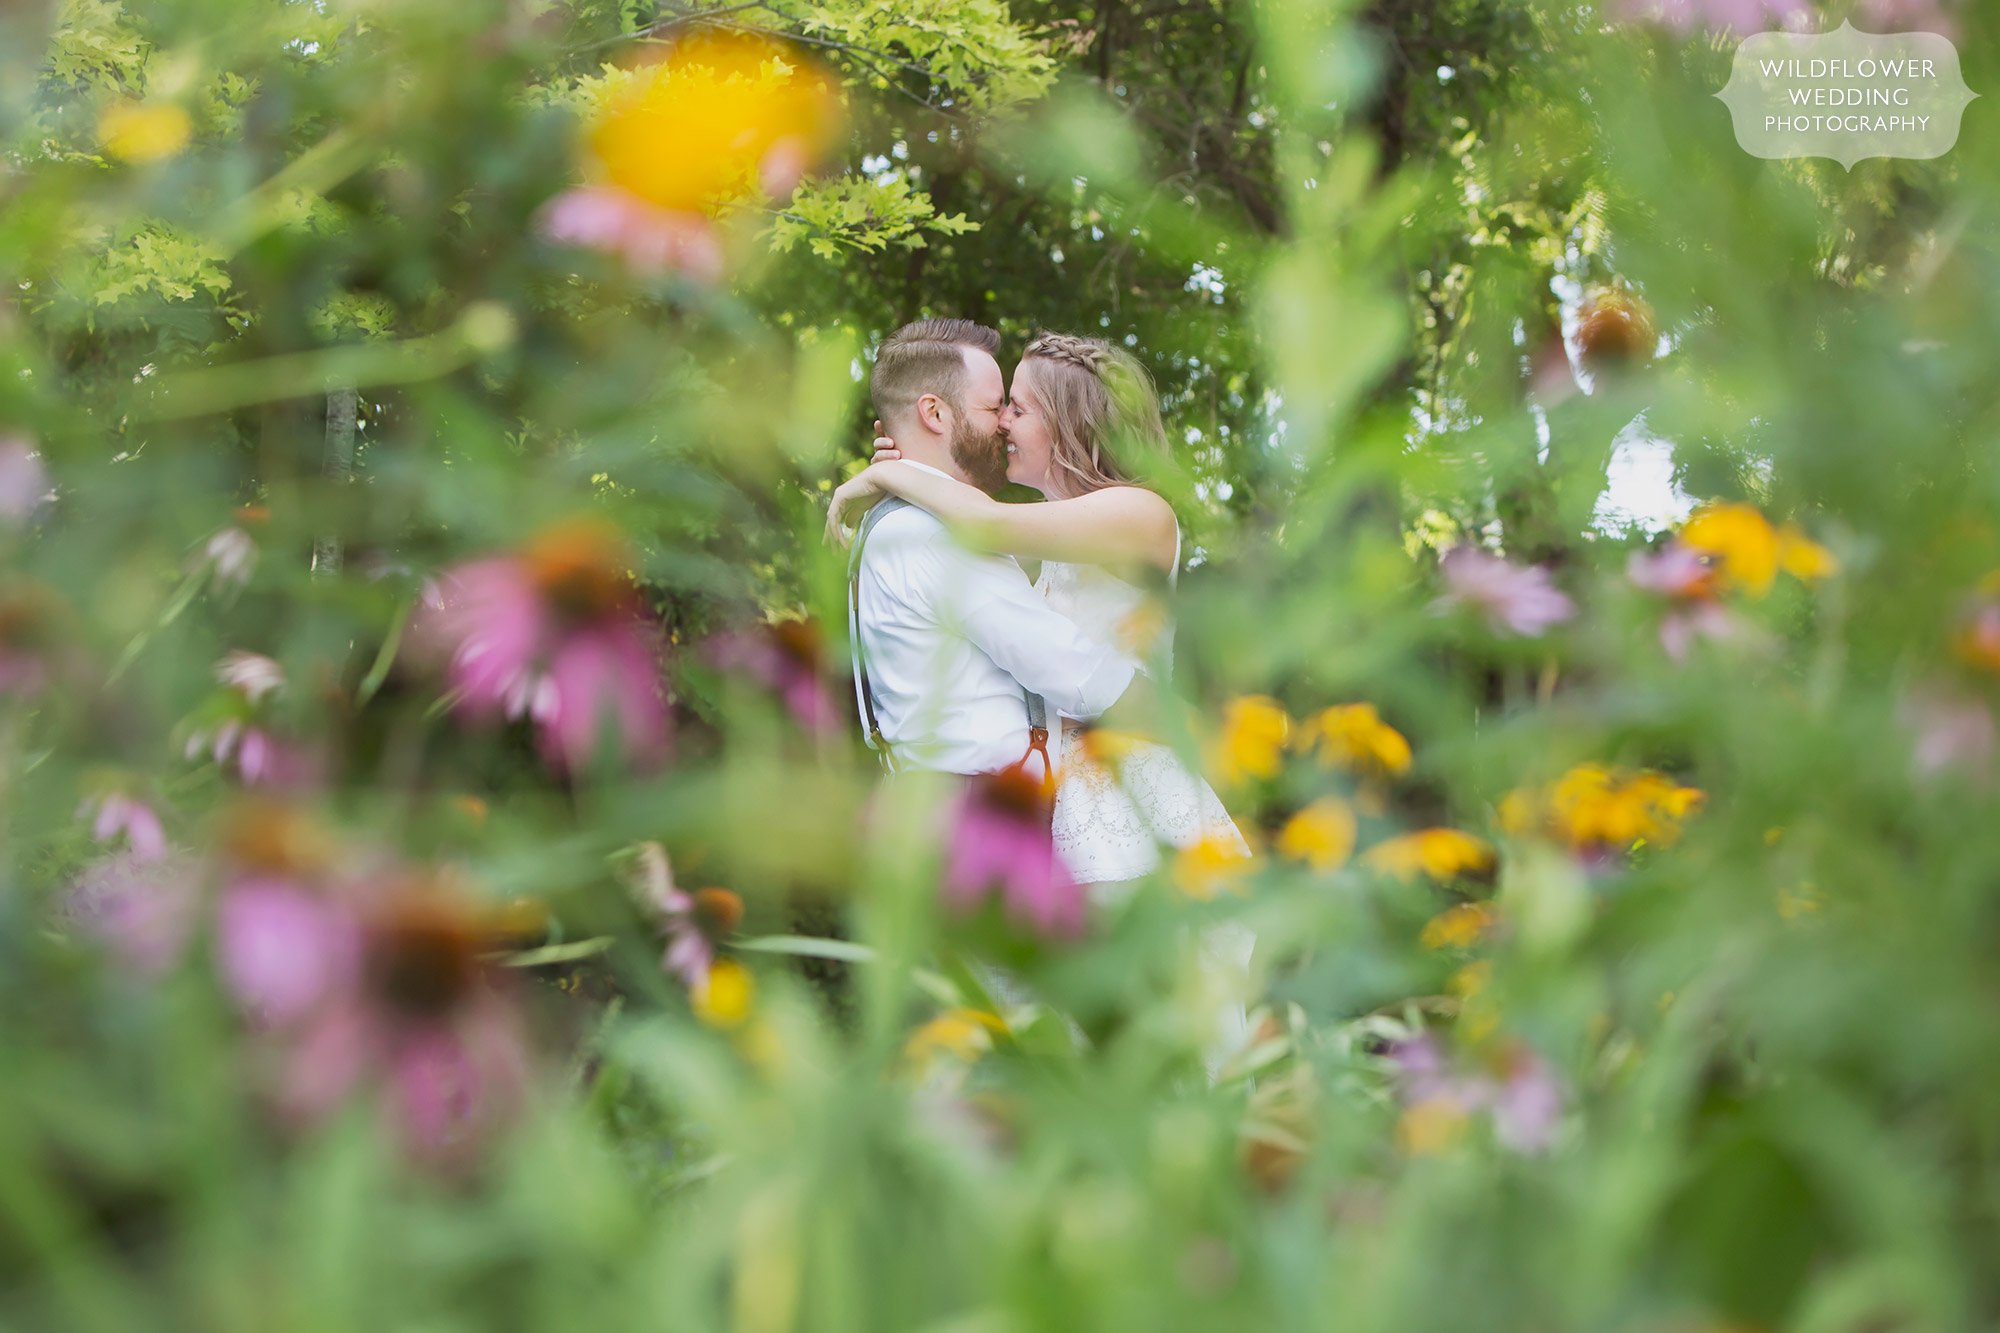 Creative wedding portrait of the bride and groom surrounded by wildflowers for their summer wedding at the Les Bourgeois Winery in Rocheport, MO.